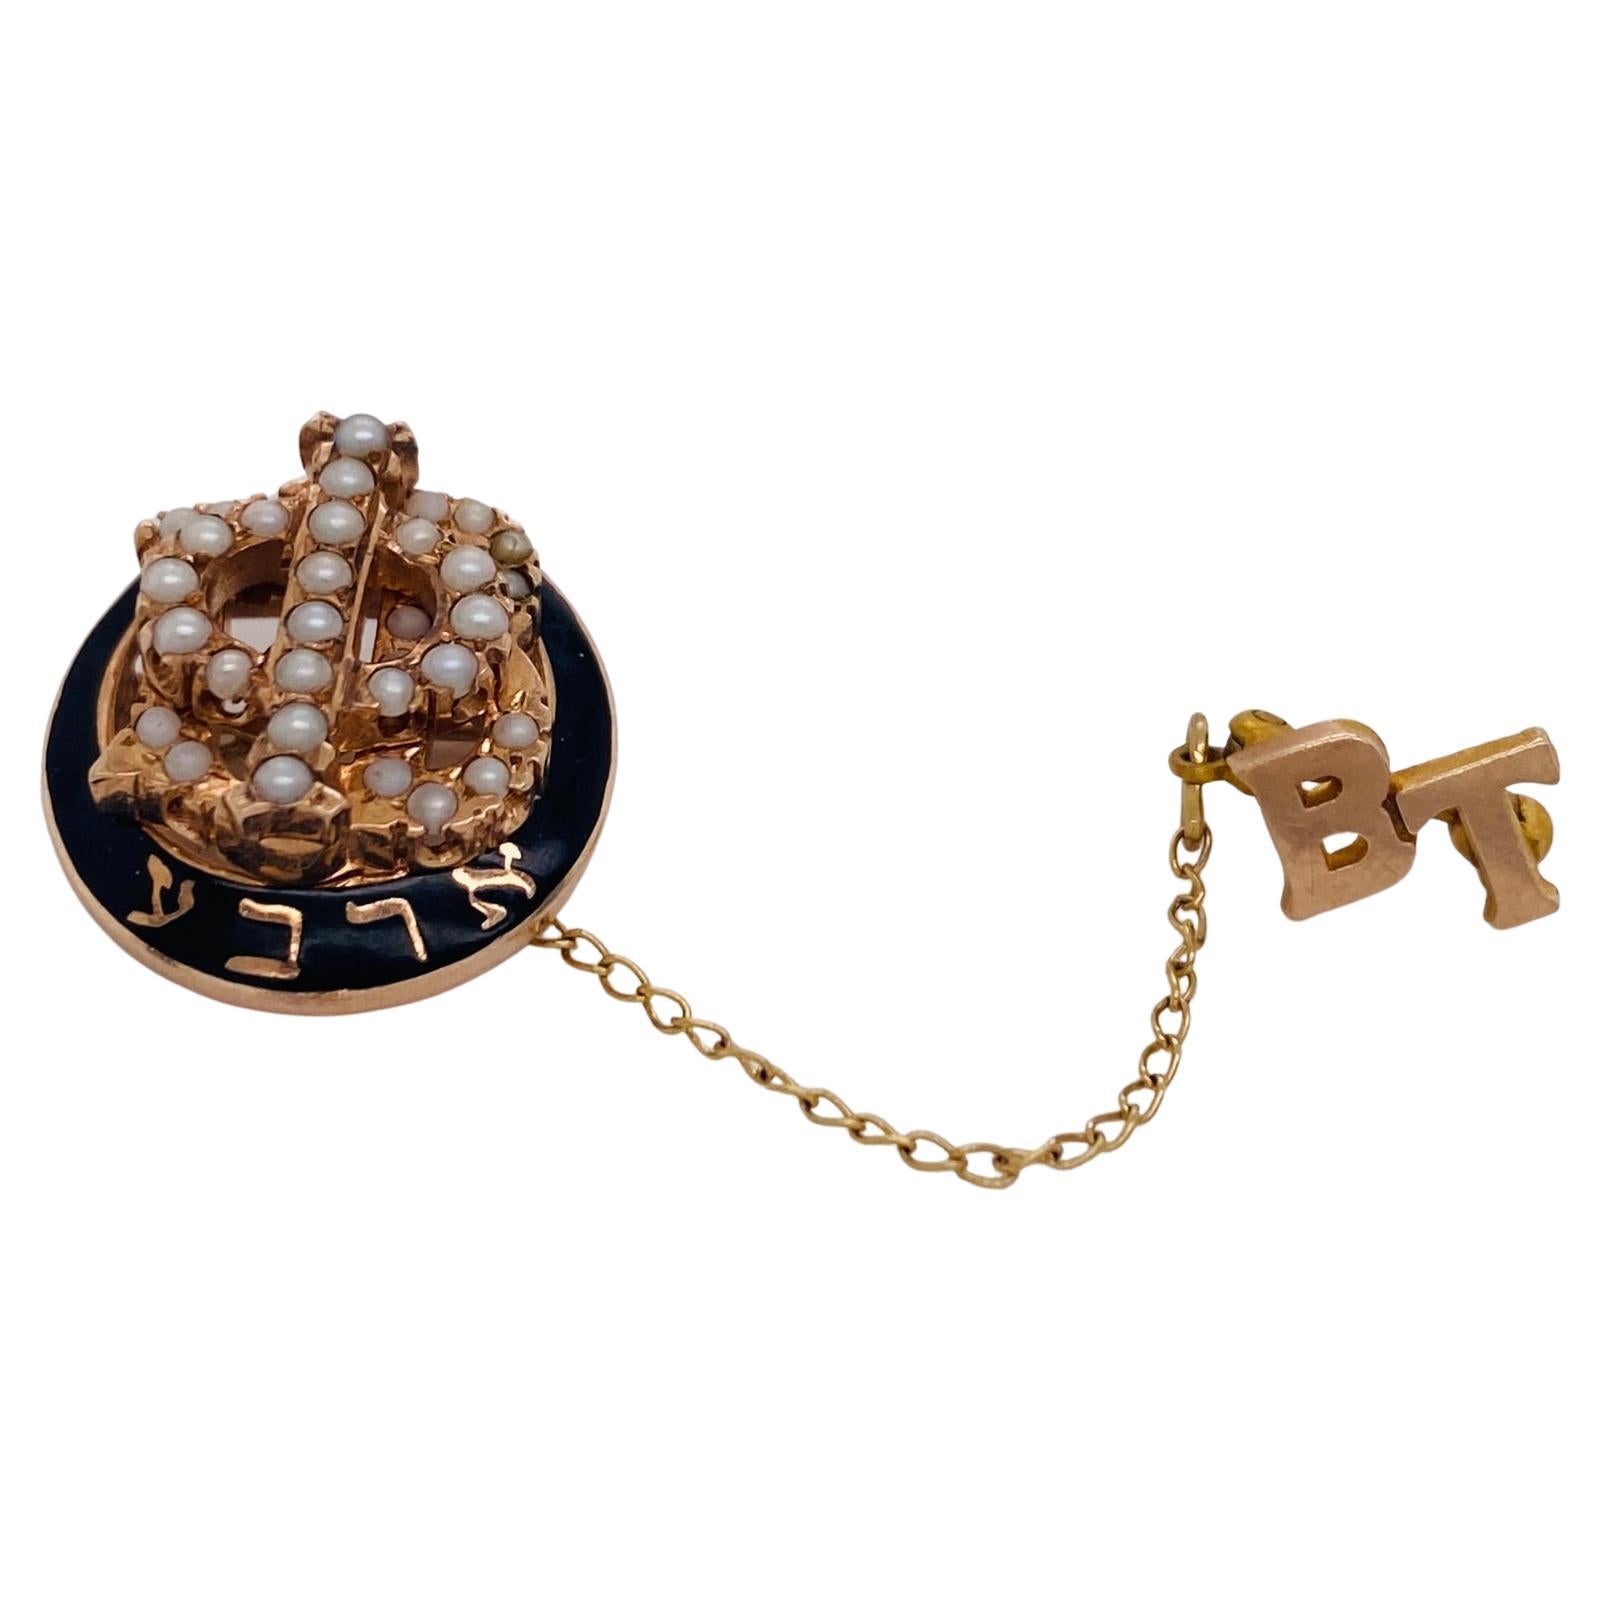 Gamma Phi Beta Sorority Brooch Pin for Texas Tech Beta Tau Chapter from 1980 For Sale